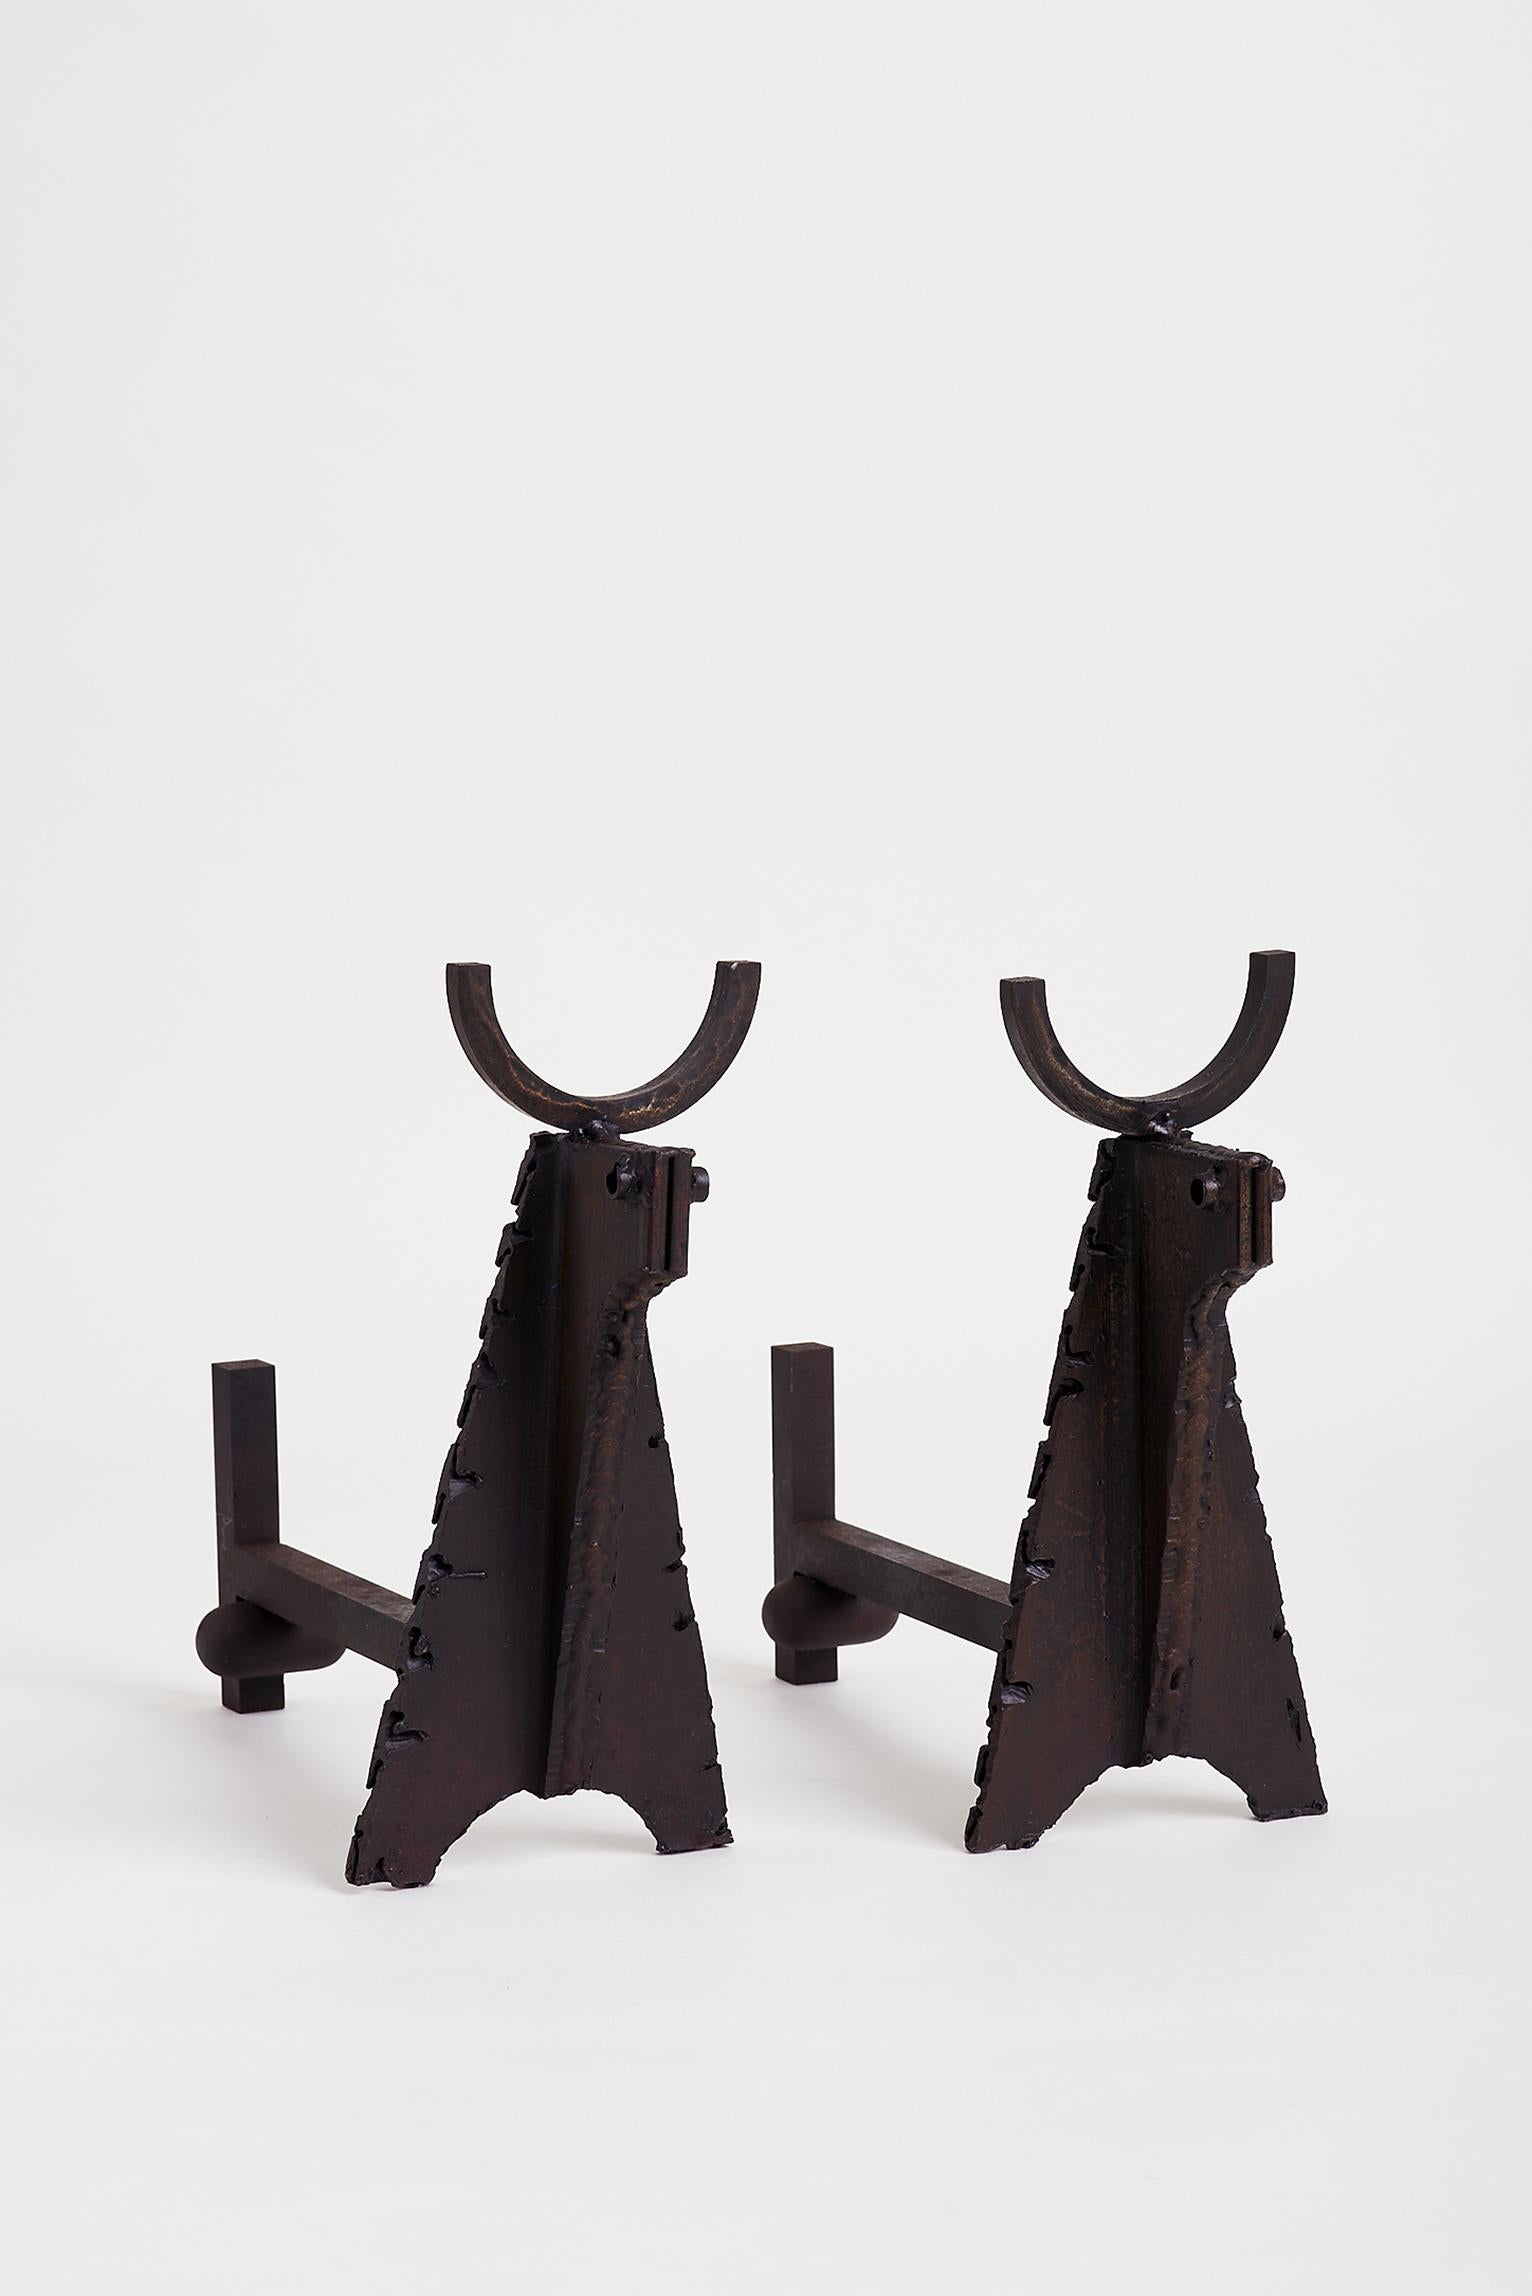 A pair of wrought iron fire dogs, depicting bulls, including their very male attributes.
France, circa 1950.